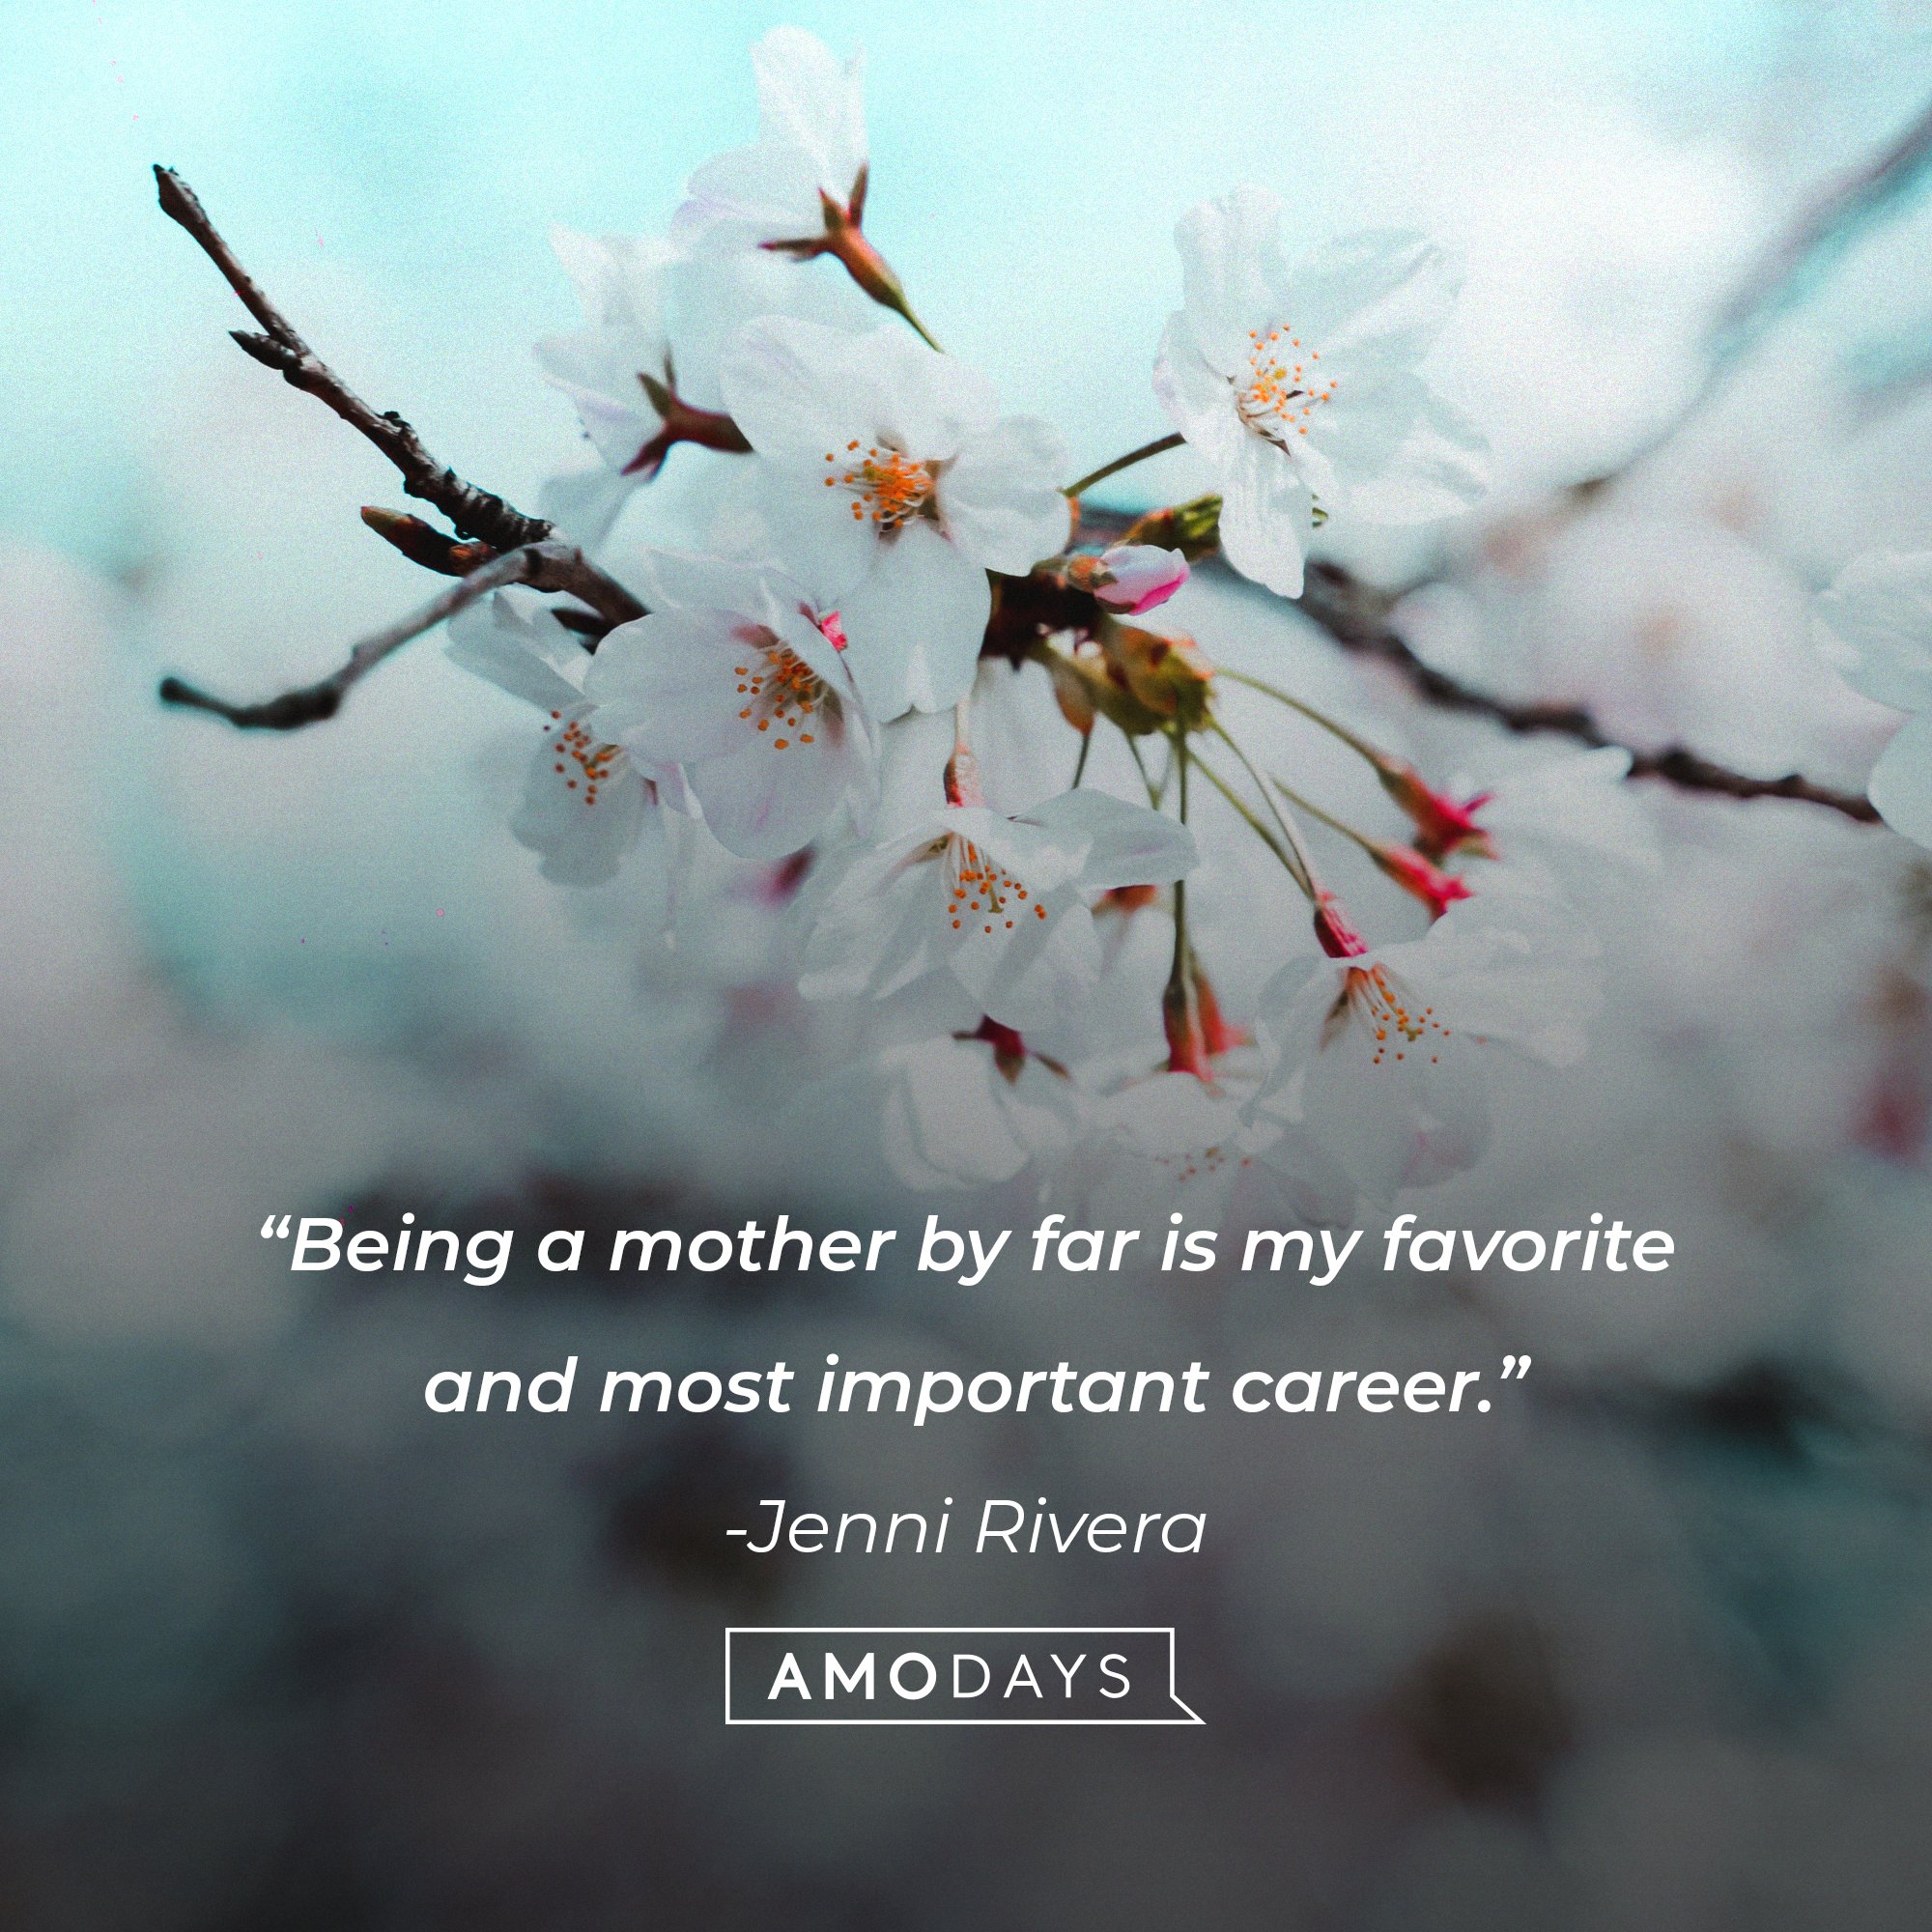 Jenni Rivera’s quote: "Being a mother by far is my favorite and most important career." | Image: AmoDays